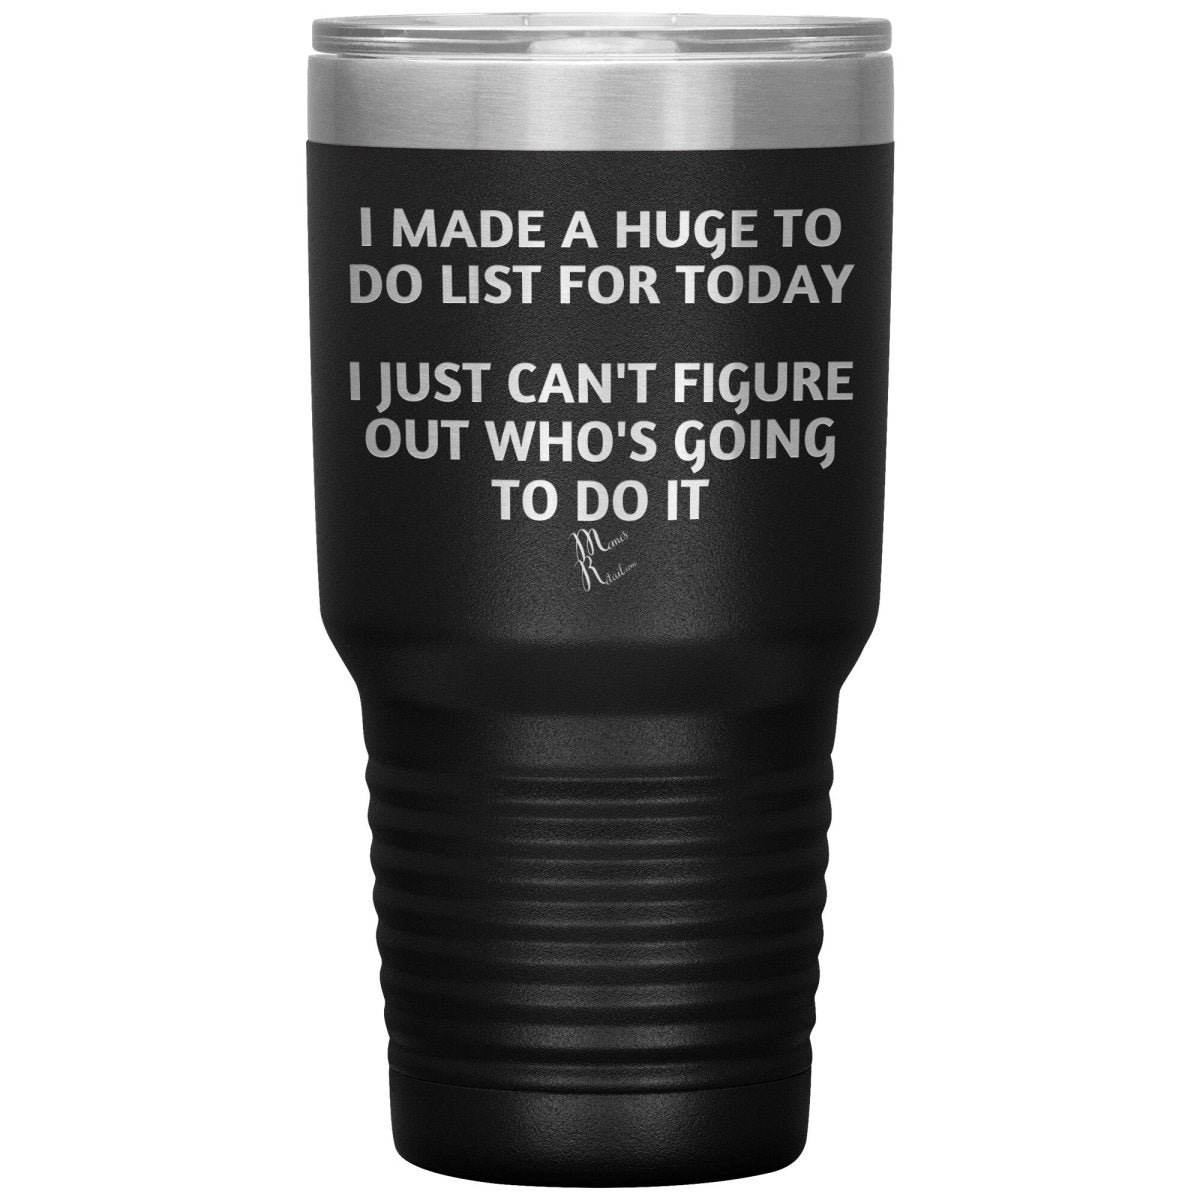 I made a huge to do list for today. I just can't figure out who's going to do it Tumblers, 30oz Insulated Tumbler / Black - MemesRetail.com